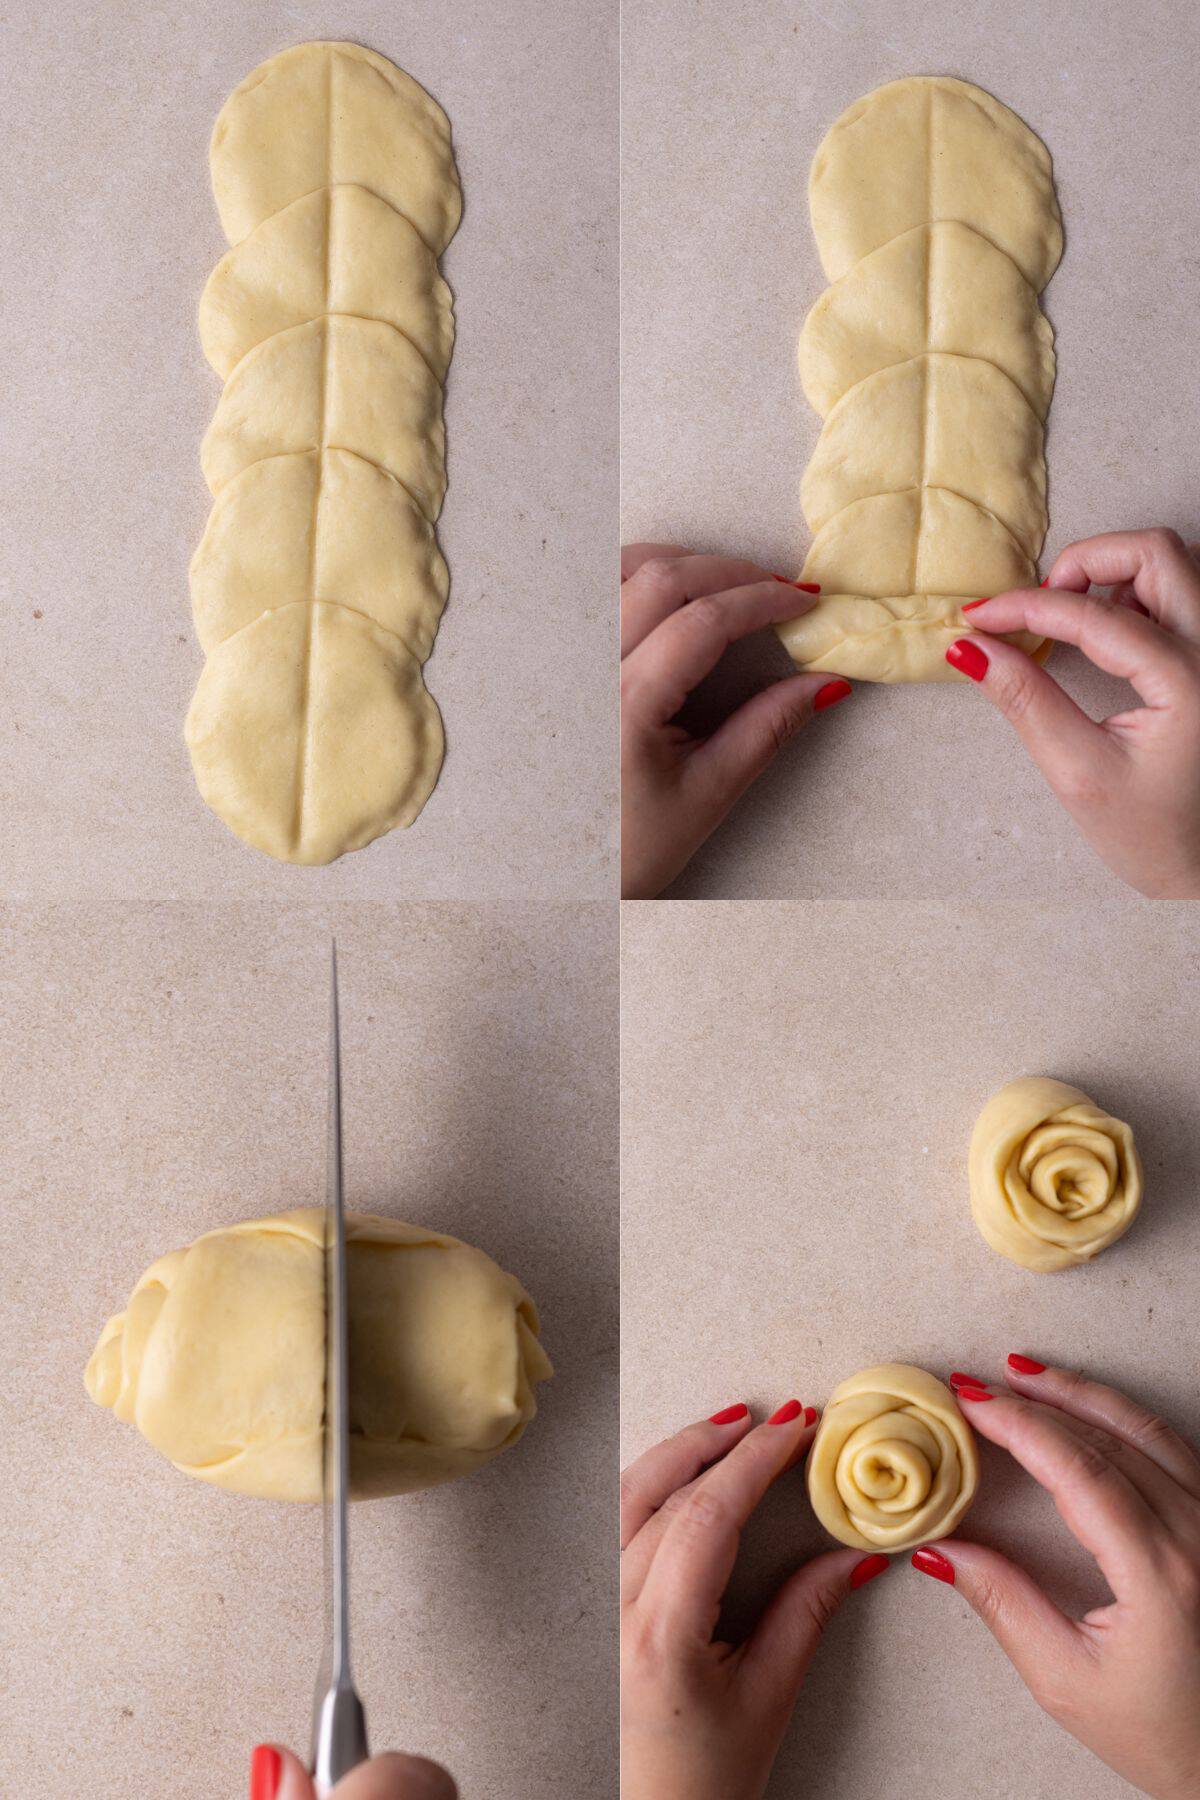 Photos showing how to shape the rose donuts.